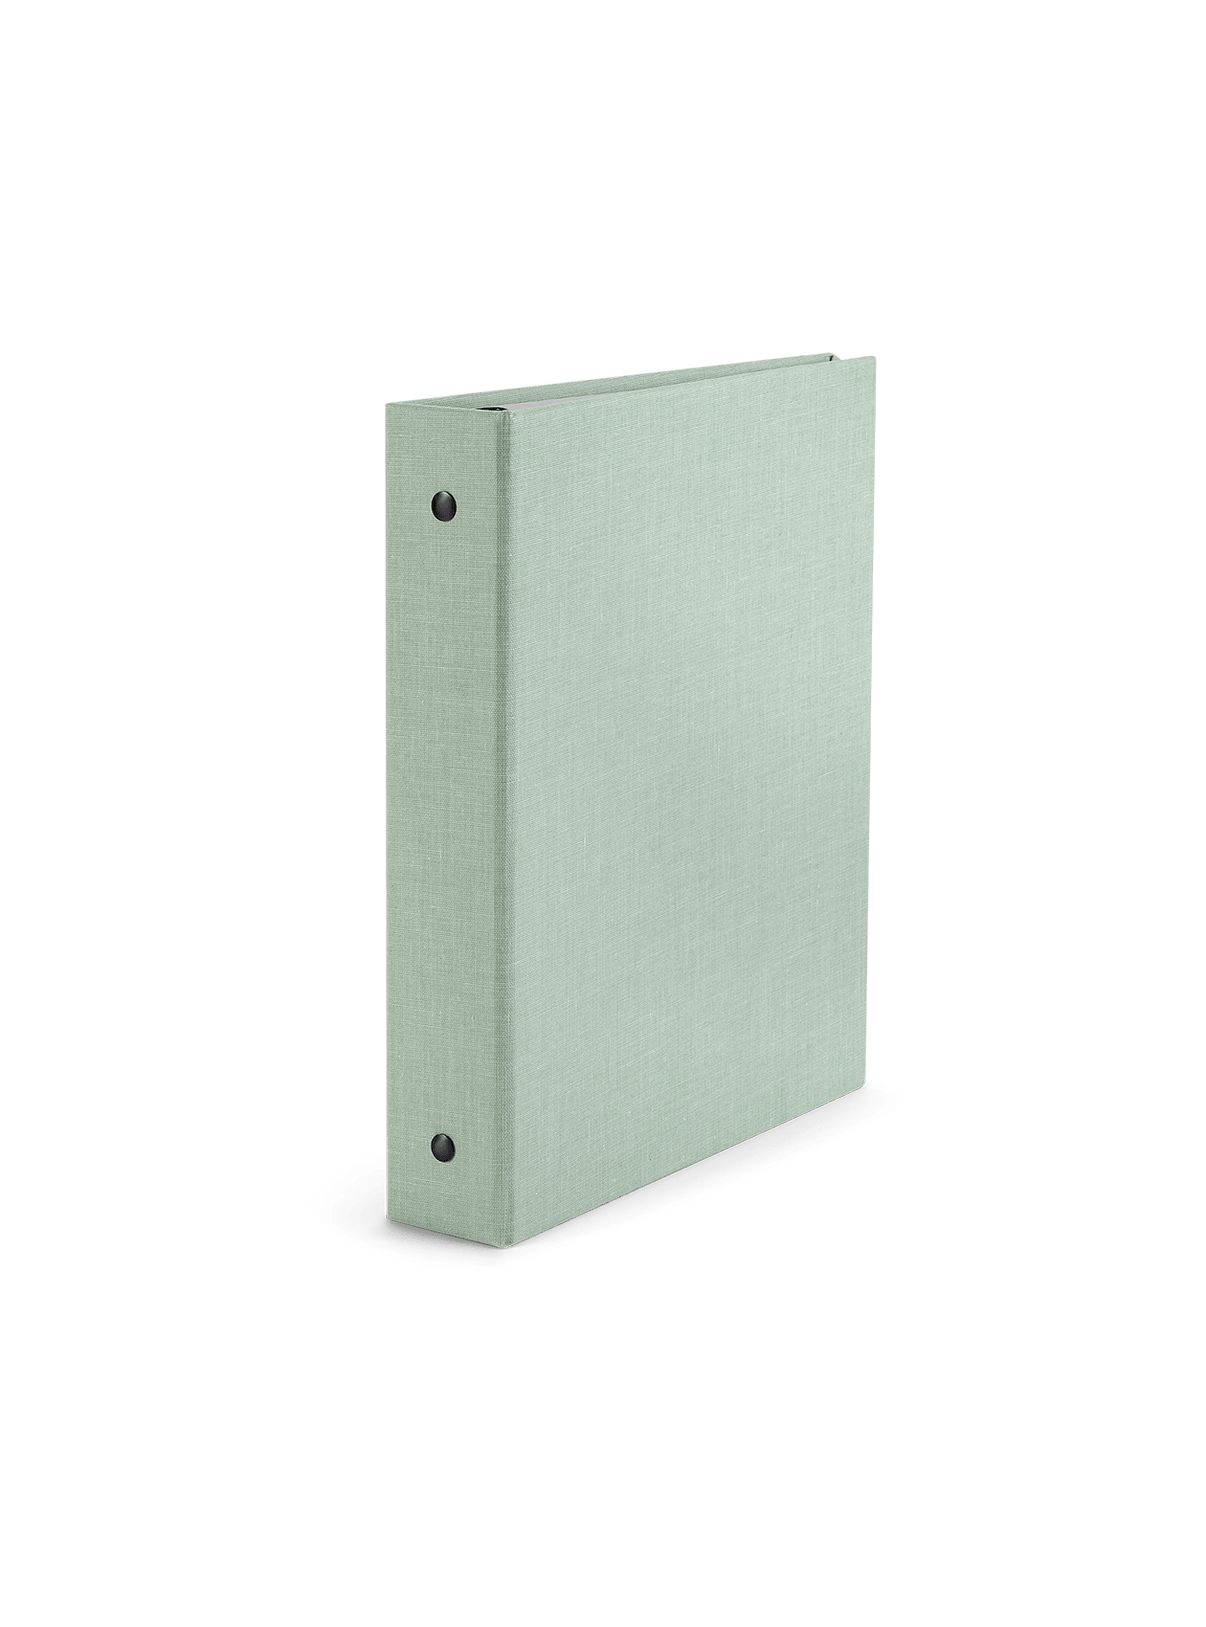 Compact Binder Planner in Mineral Green standing side view